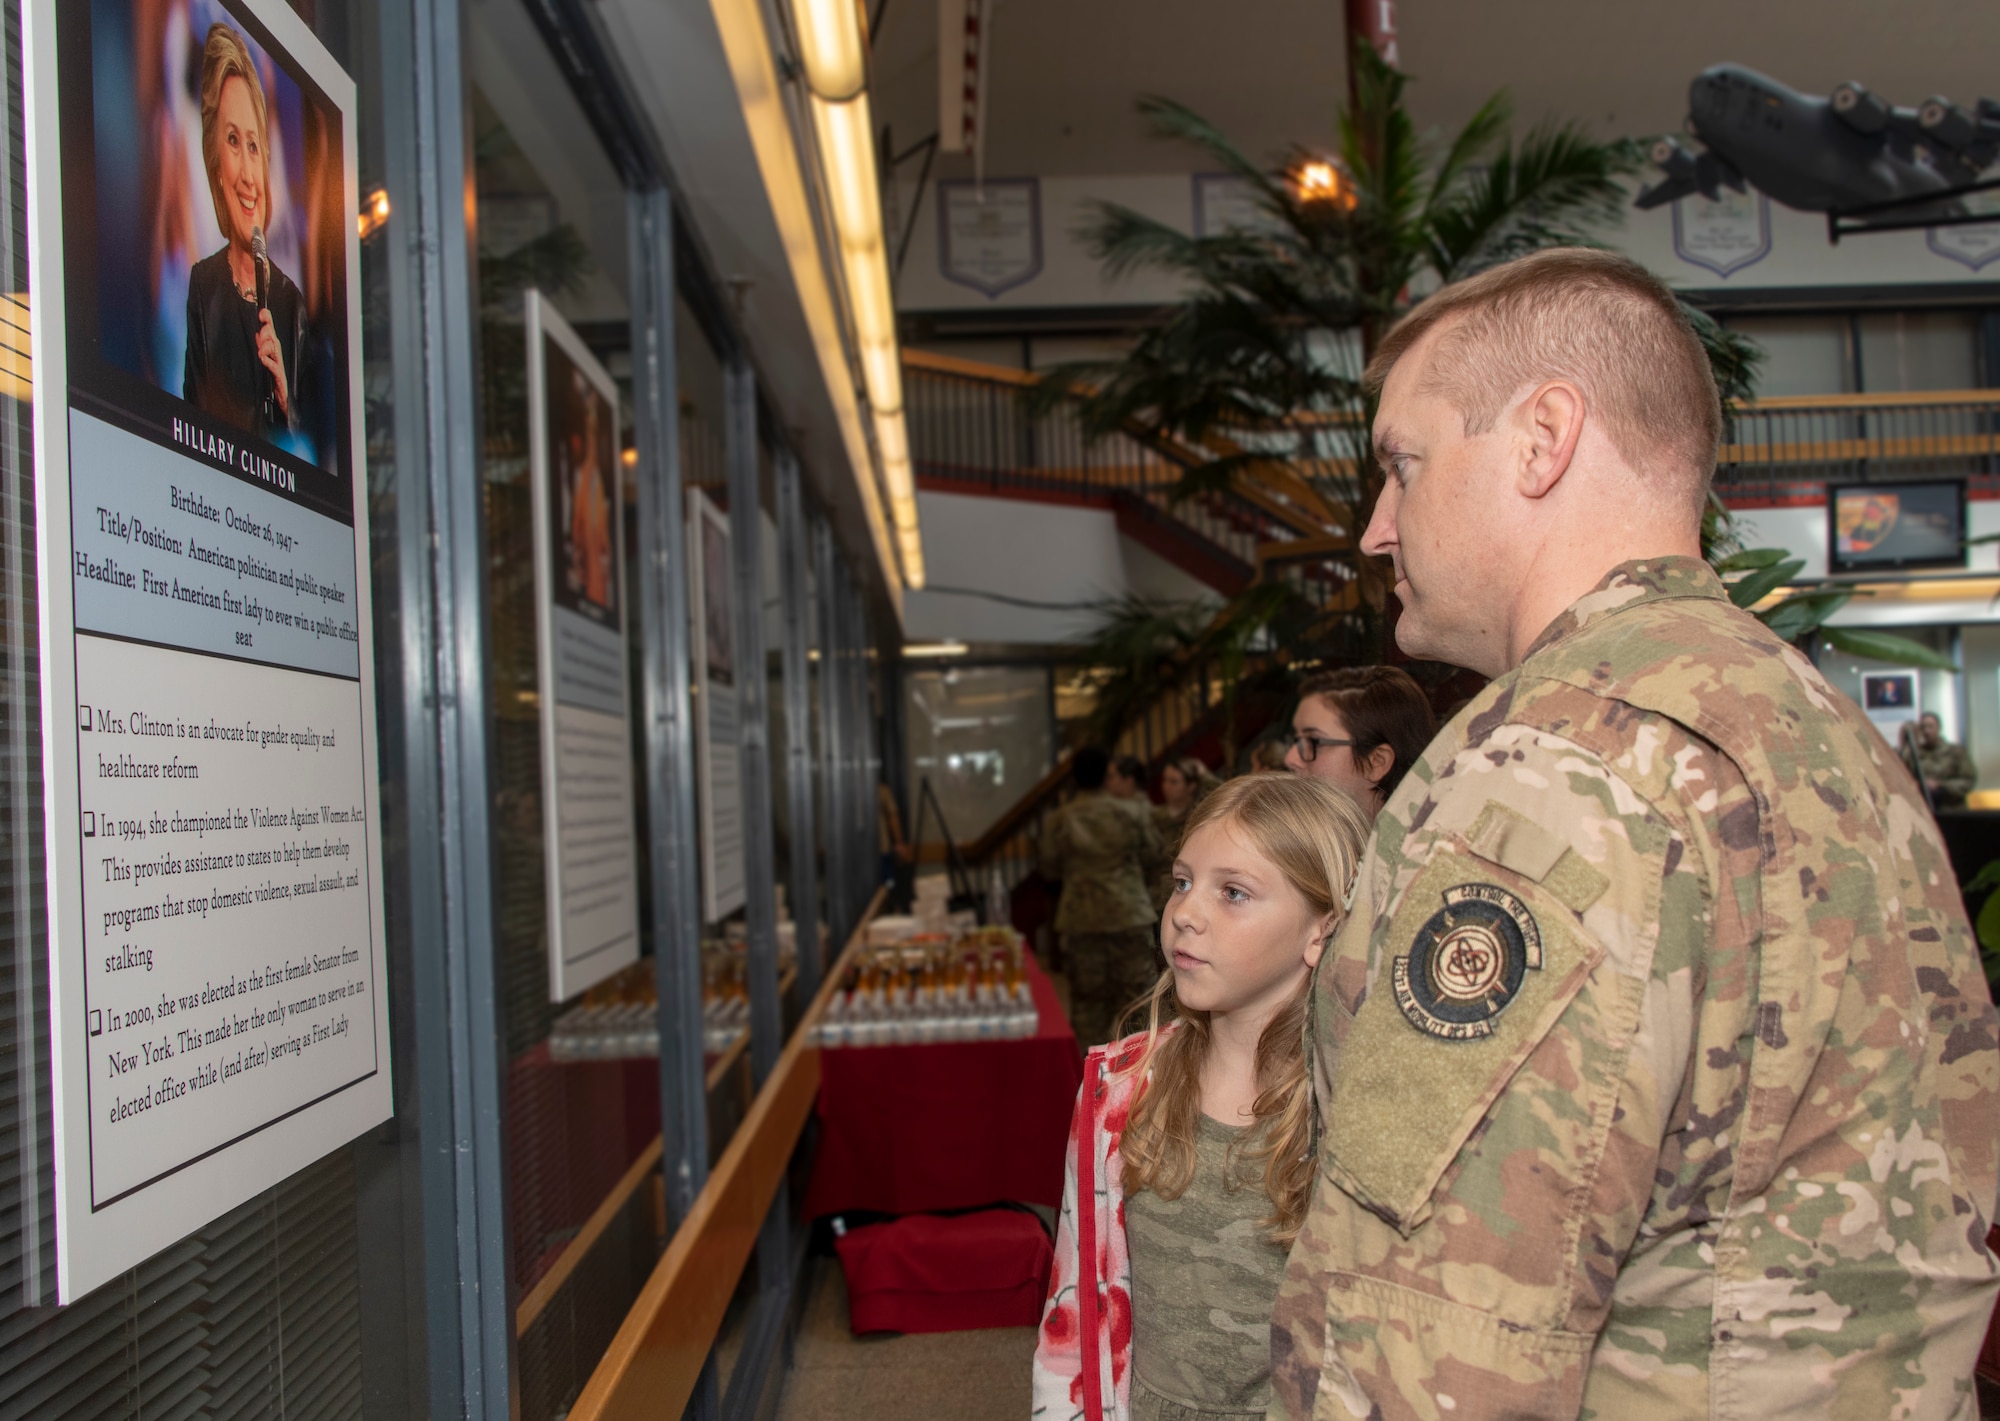 U.S. Air Force Senior Master Sgt. Michael Dean, 321st Air Mobility Operations Squadron, and his daughter Morgan, read facts about former United States Secretary of State, Hillary Clinton, during a Women’s History Month social gathering, March 20, 2019, at Travis Air Force Base, California. Since 1987, the month of March has been designated to celebrate the historical and ongoing achievements and contributions of women. Members of the Women Inspiring the Next Generation’s Success committee were responsible for organizing the event which included an exhibit highlighting extraordinary female heroes and featured speakers prominent in the Travis community. (U.S. Air Force photo by Heide Couch)